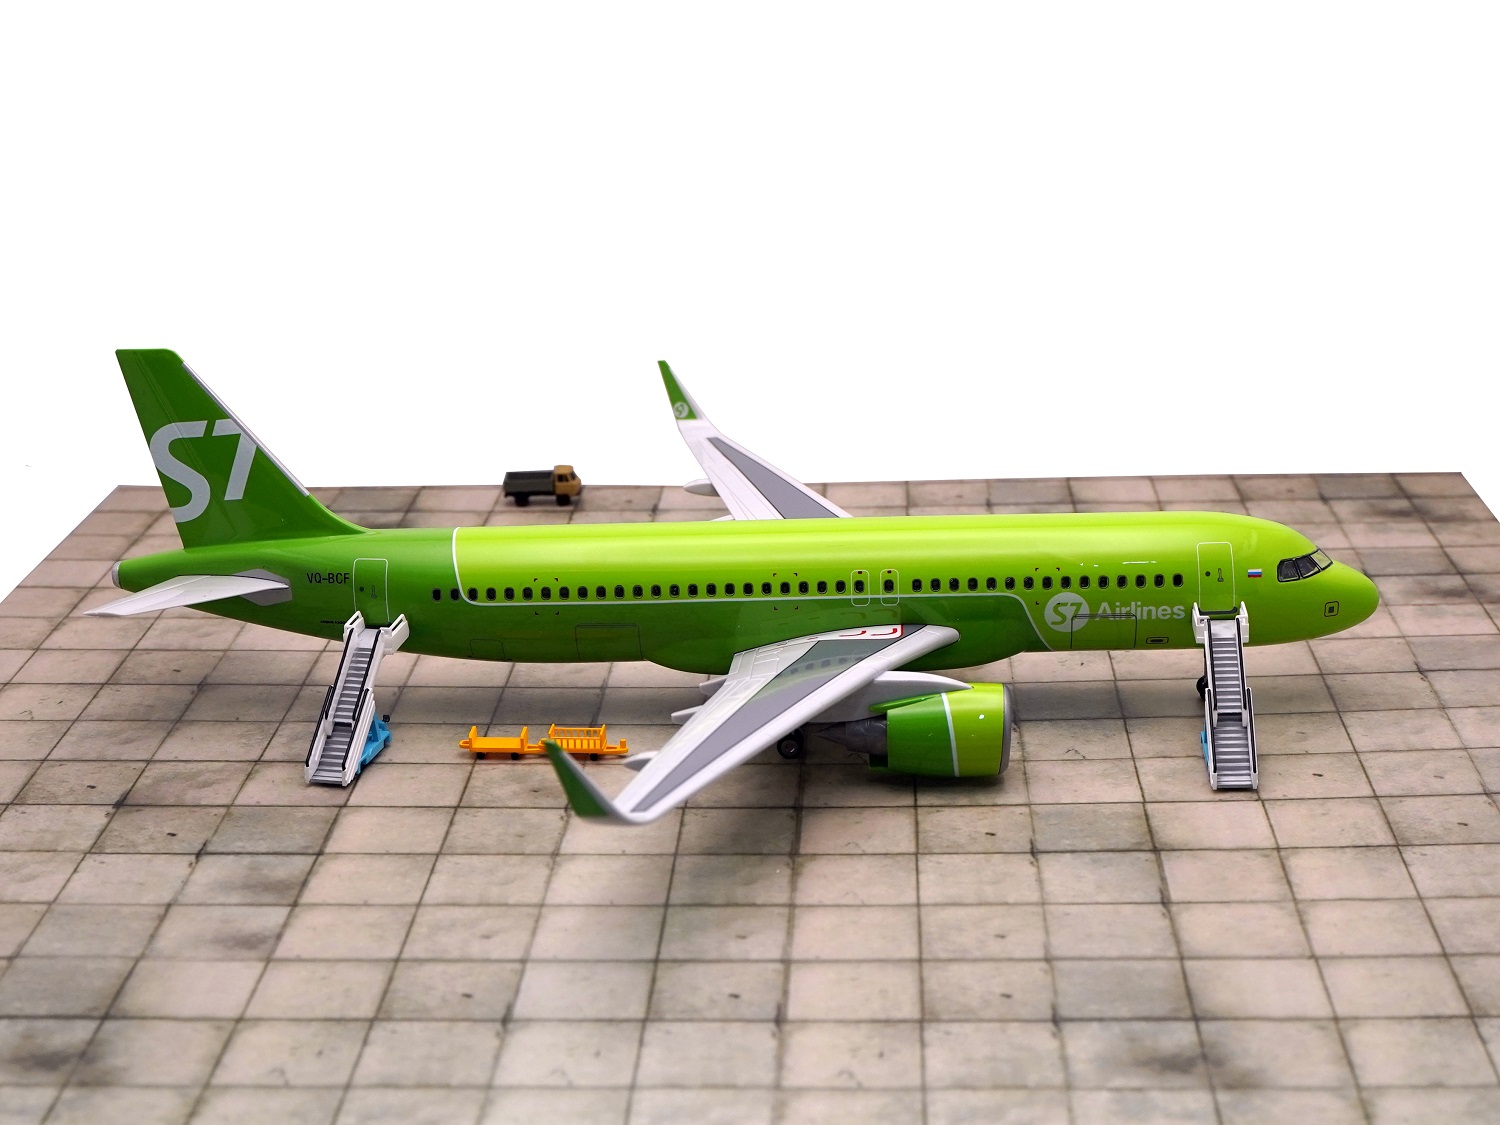   Airbus A320 Neo,  S7 Airlines .    .  # 10 hobbyplus.ru